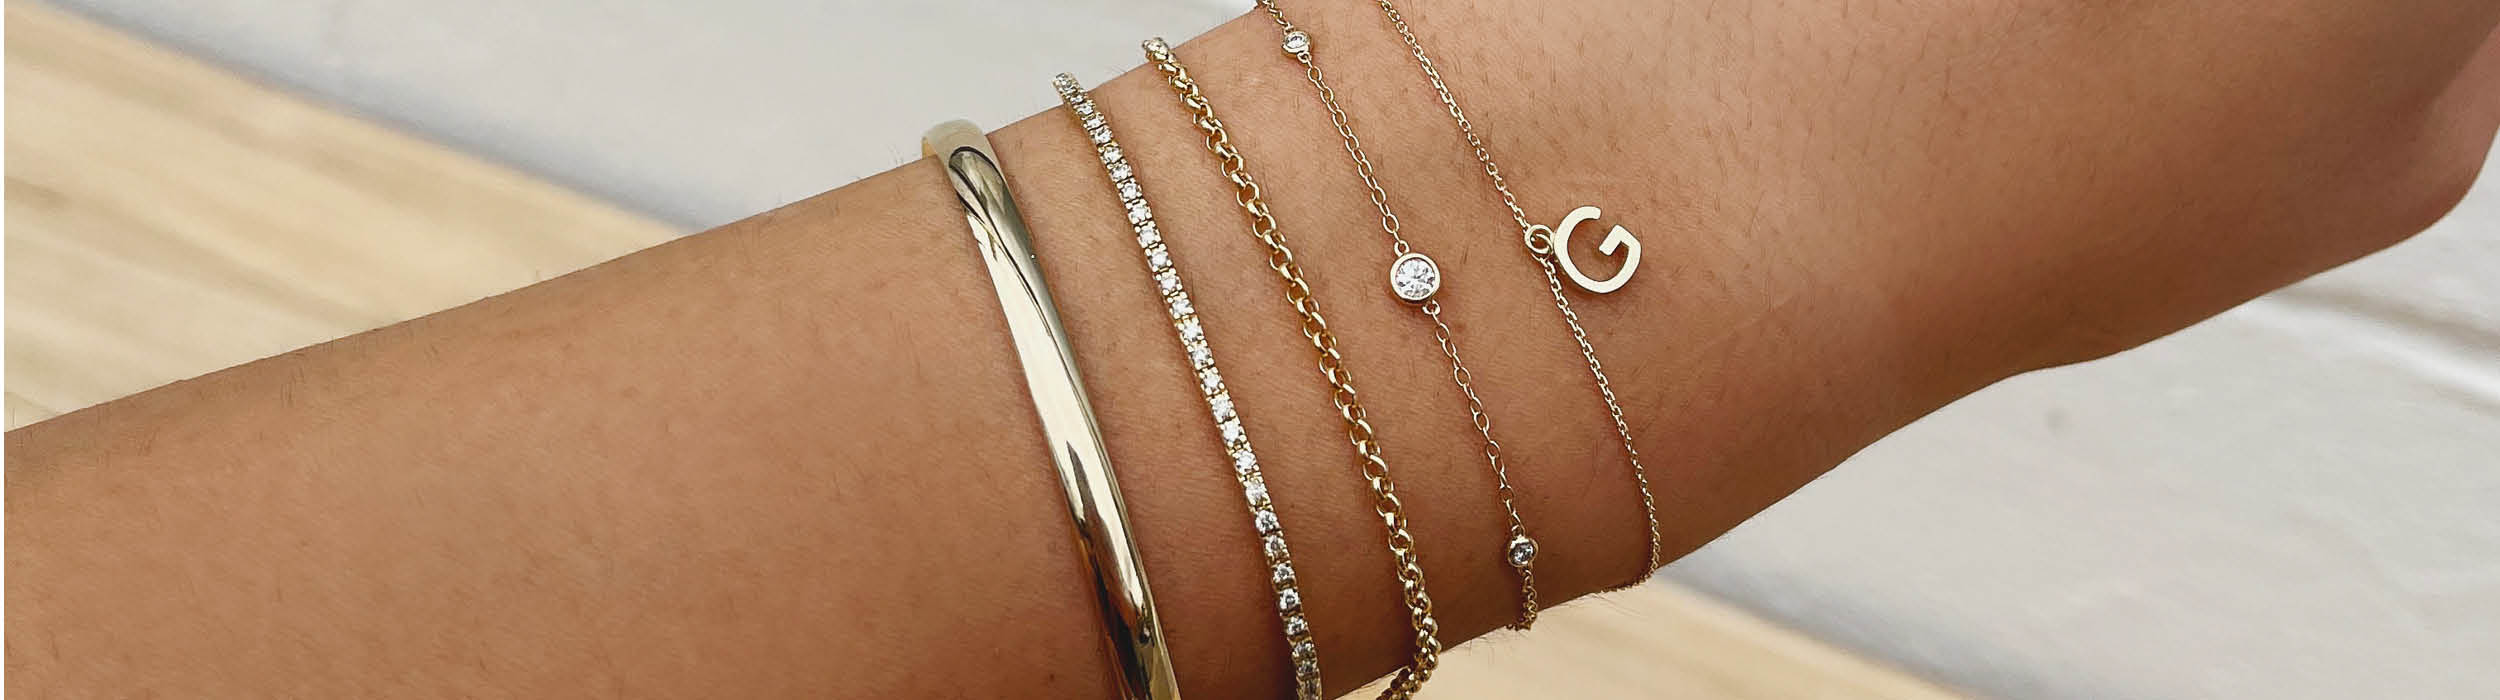 Five yellow gold bracelets stacked on a wrist